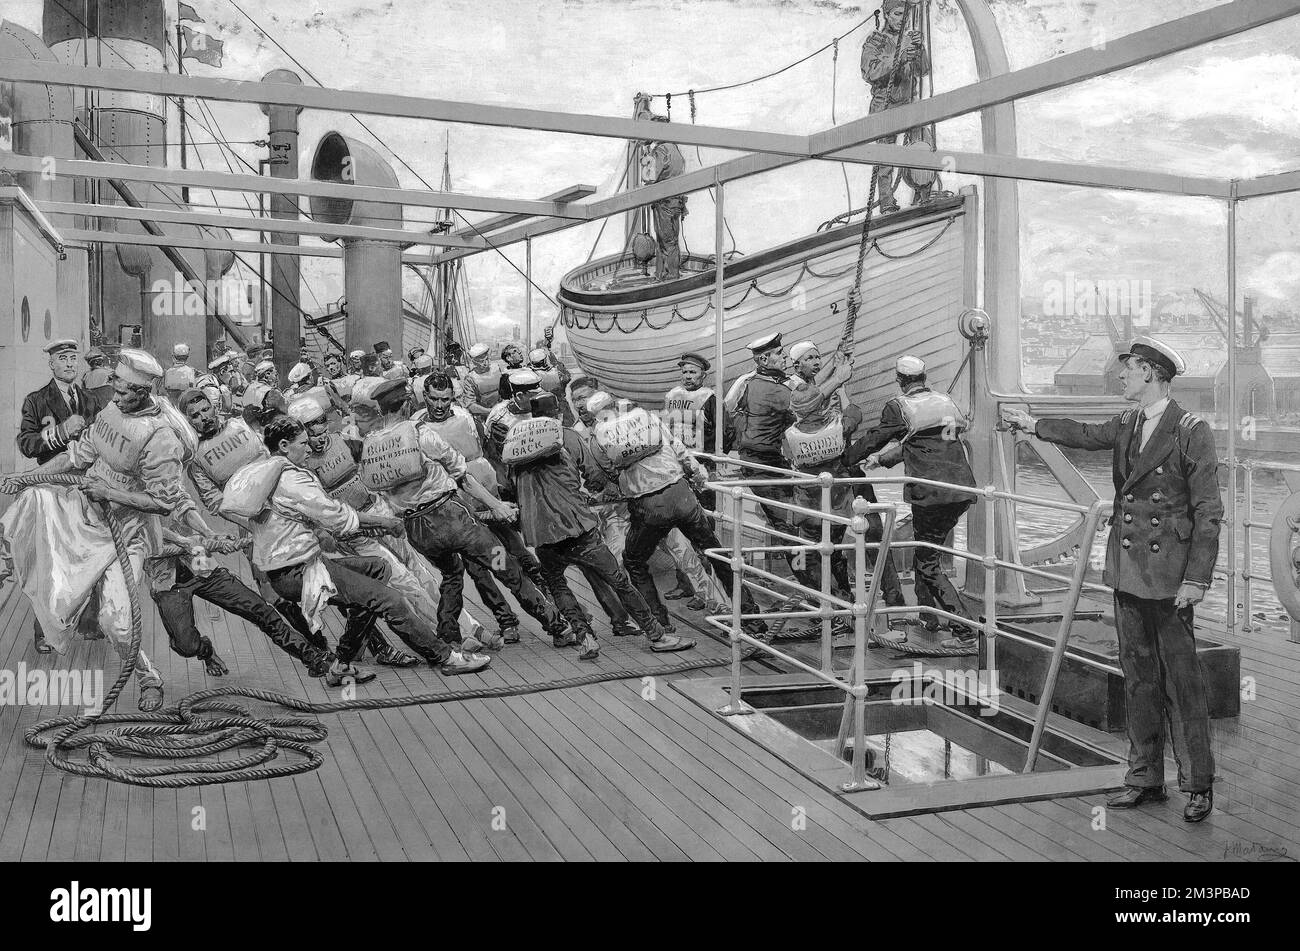 Sailors hauling a boat onto the deck of a ship, directed by an officer, probably as part of a lifeboat drill, May 1915.      Date: 1915 Stock Photo